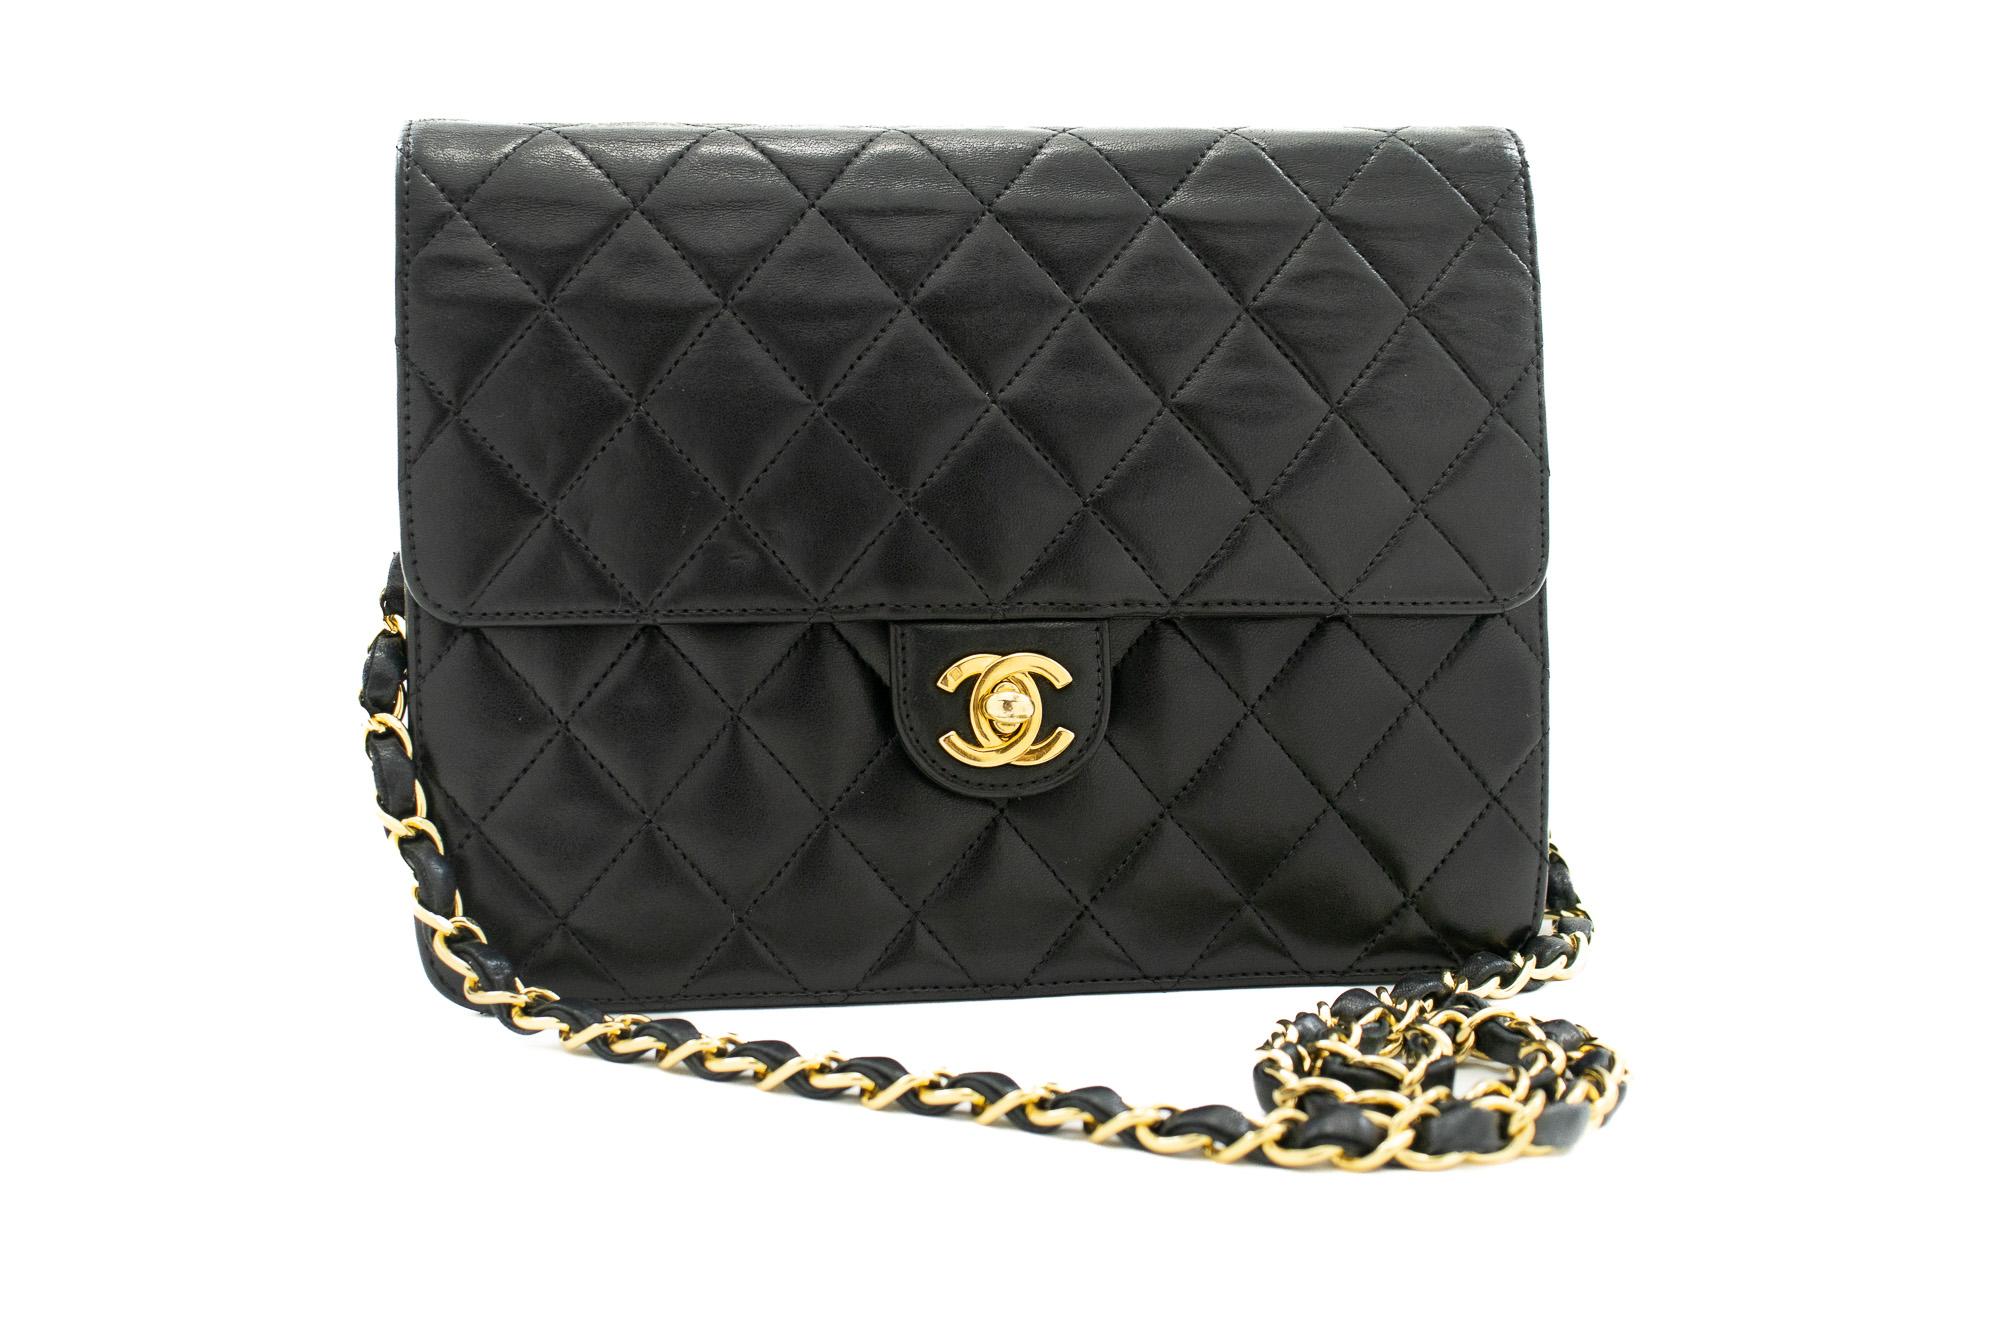 An authentic CHANEL Small Chain Shoulder Bag Black Quilted Flap made of black Lambskin Purse. The color is Black. The outside material is Leather. The pattern is Solid. This item is Contemporary. The year of manufacture would be 2003.
Conditions &